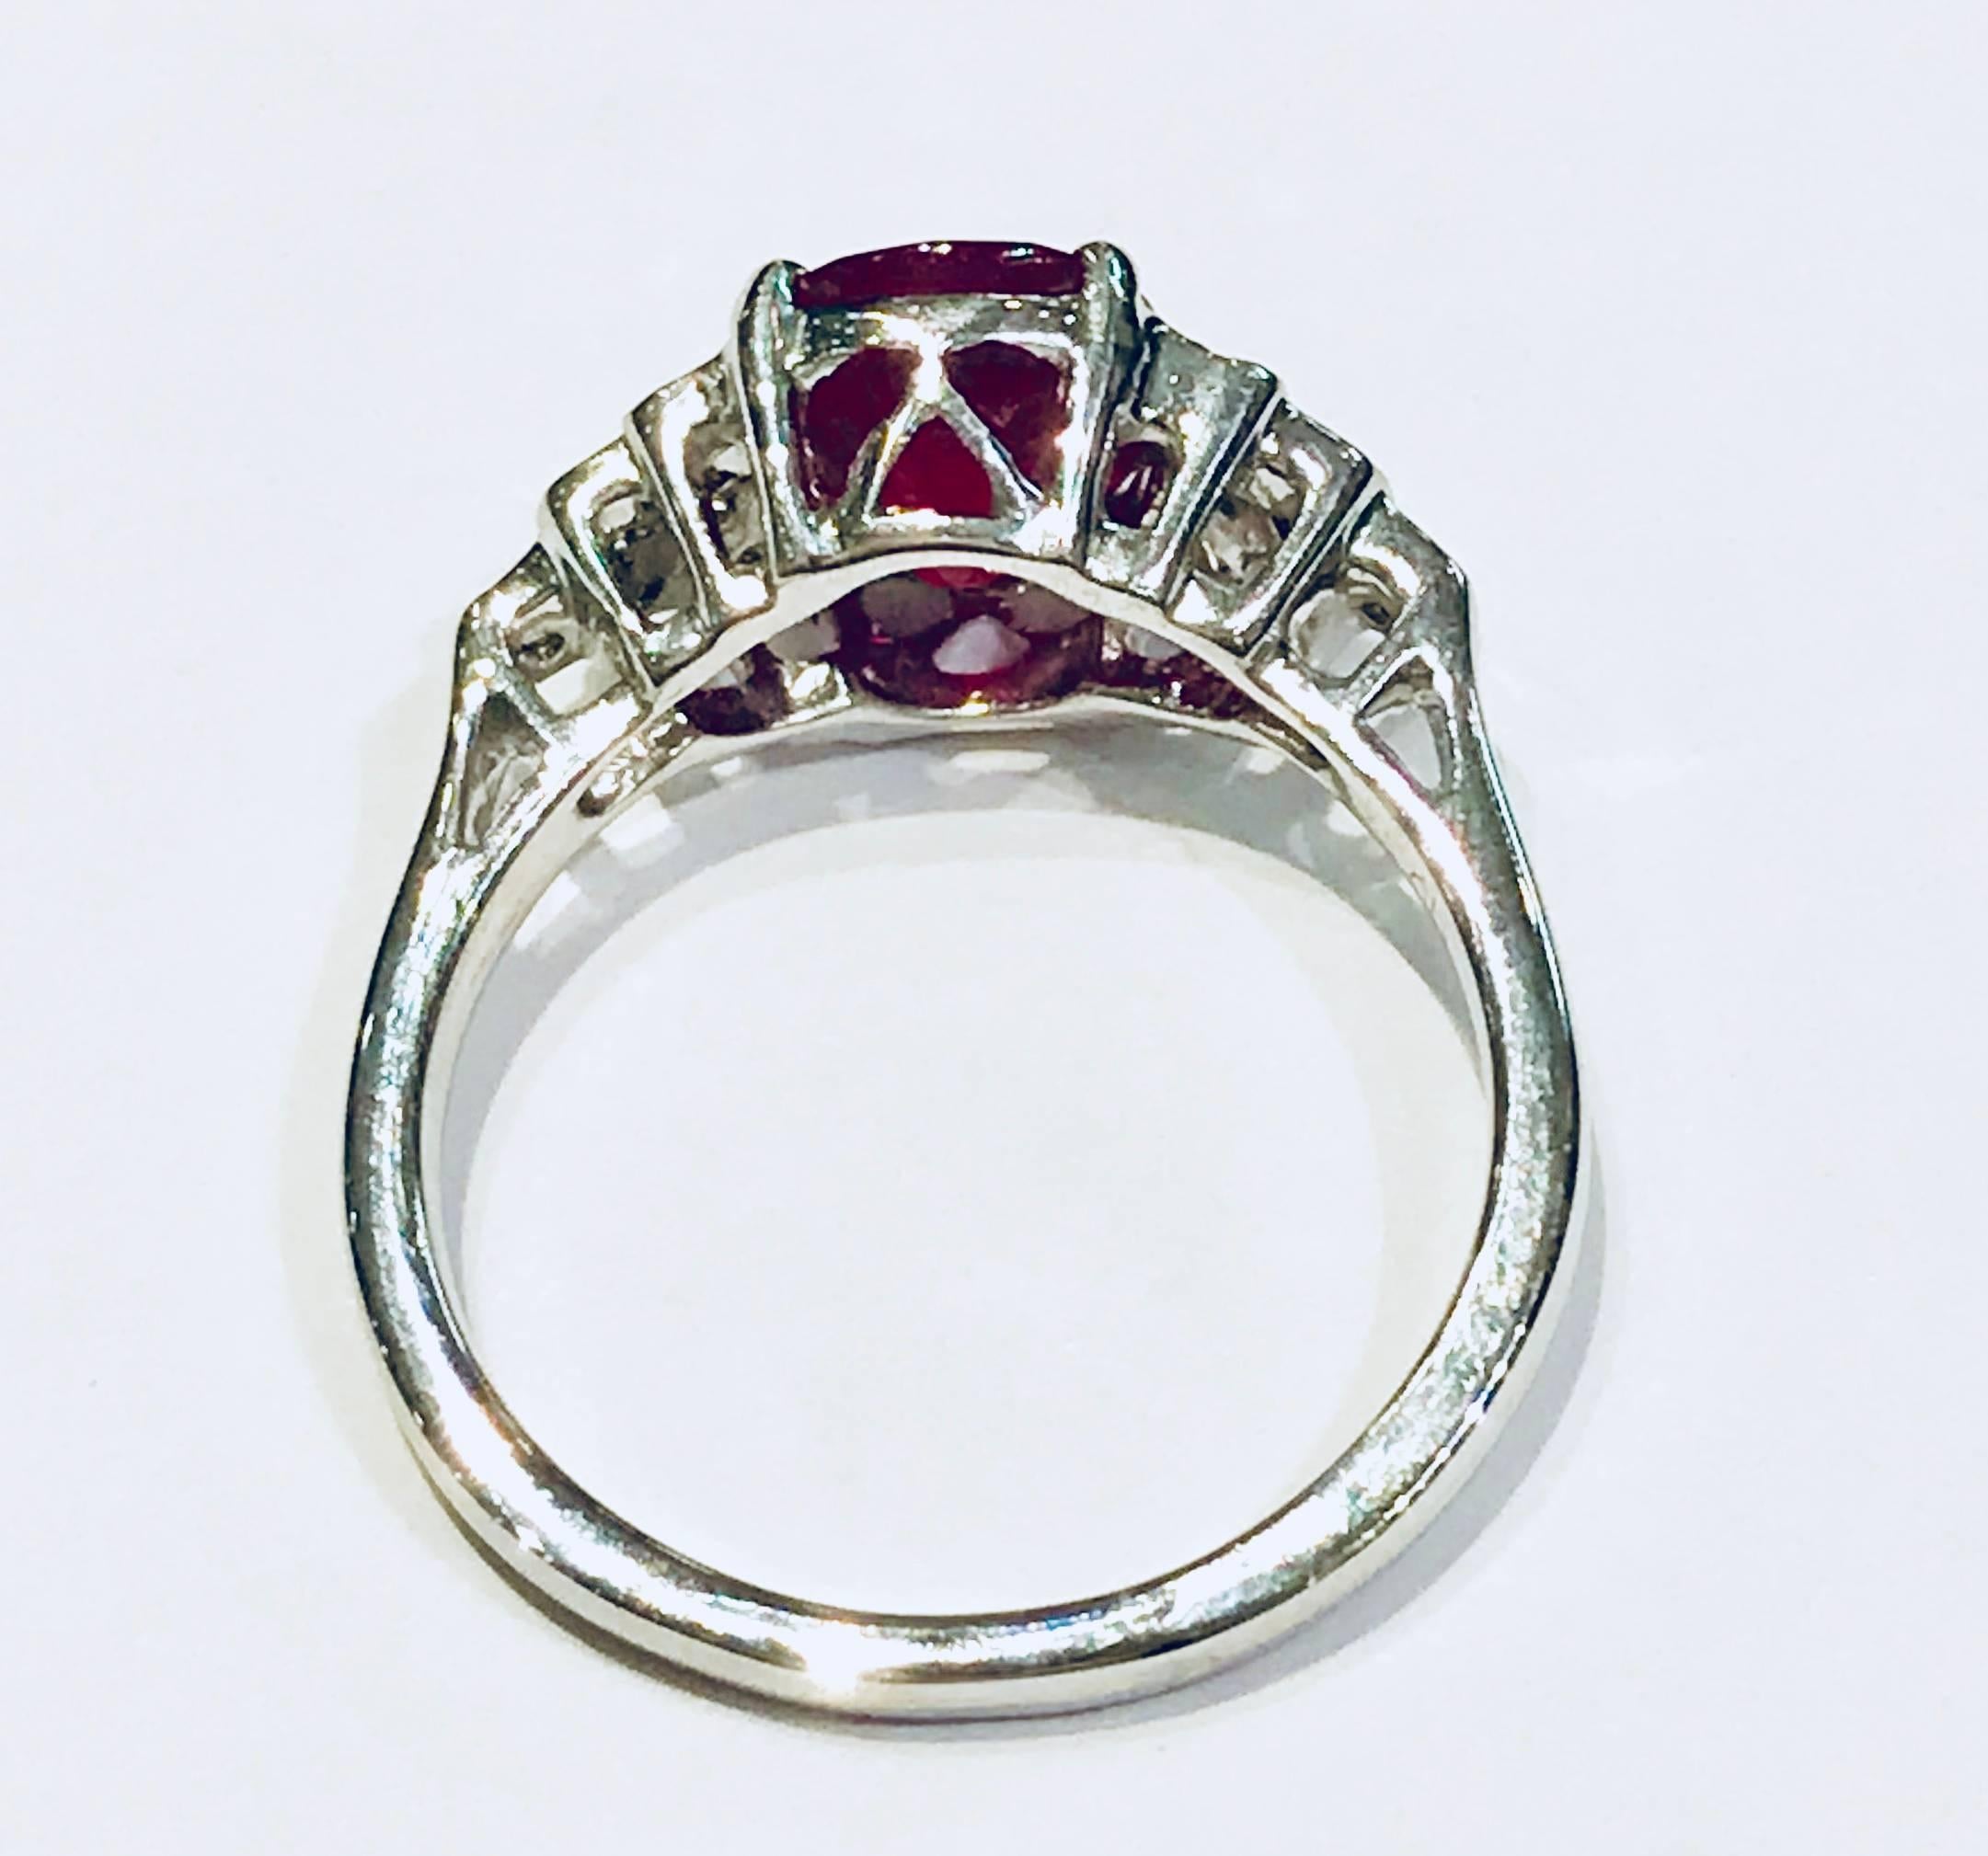 The Andeole  Ruby Ring is in 18 carat white gold with palladium, set with a central cushion cut ruby weighing 2,08 carats shouldered by 0,19 total carats of brillant cut diamonds, EVVS.
The basket under the center stone in hand made with an antique